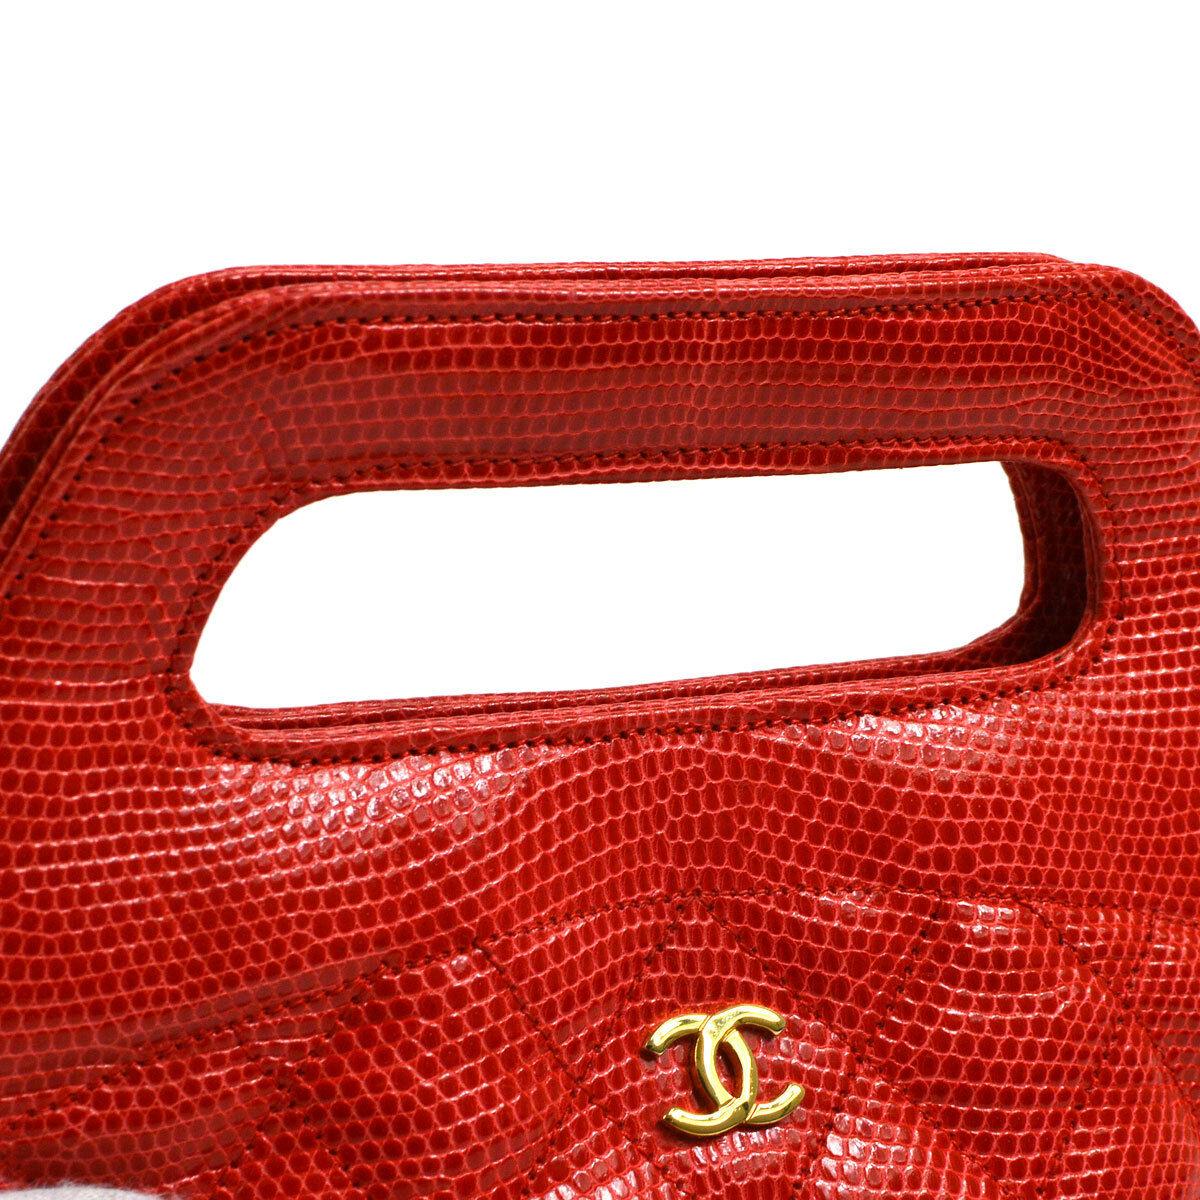 Chanel Red Lizard Exotic Small Mini 2 in 1 Gold Top Handle Satchel shoulder Bag in Box

Lizard
Leather
Gold tone hardware
Leather lining
Date code present
Made in France
Handle drop 2